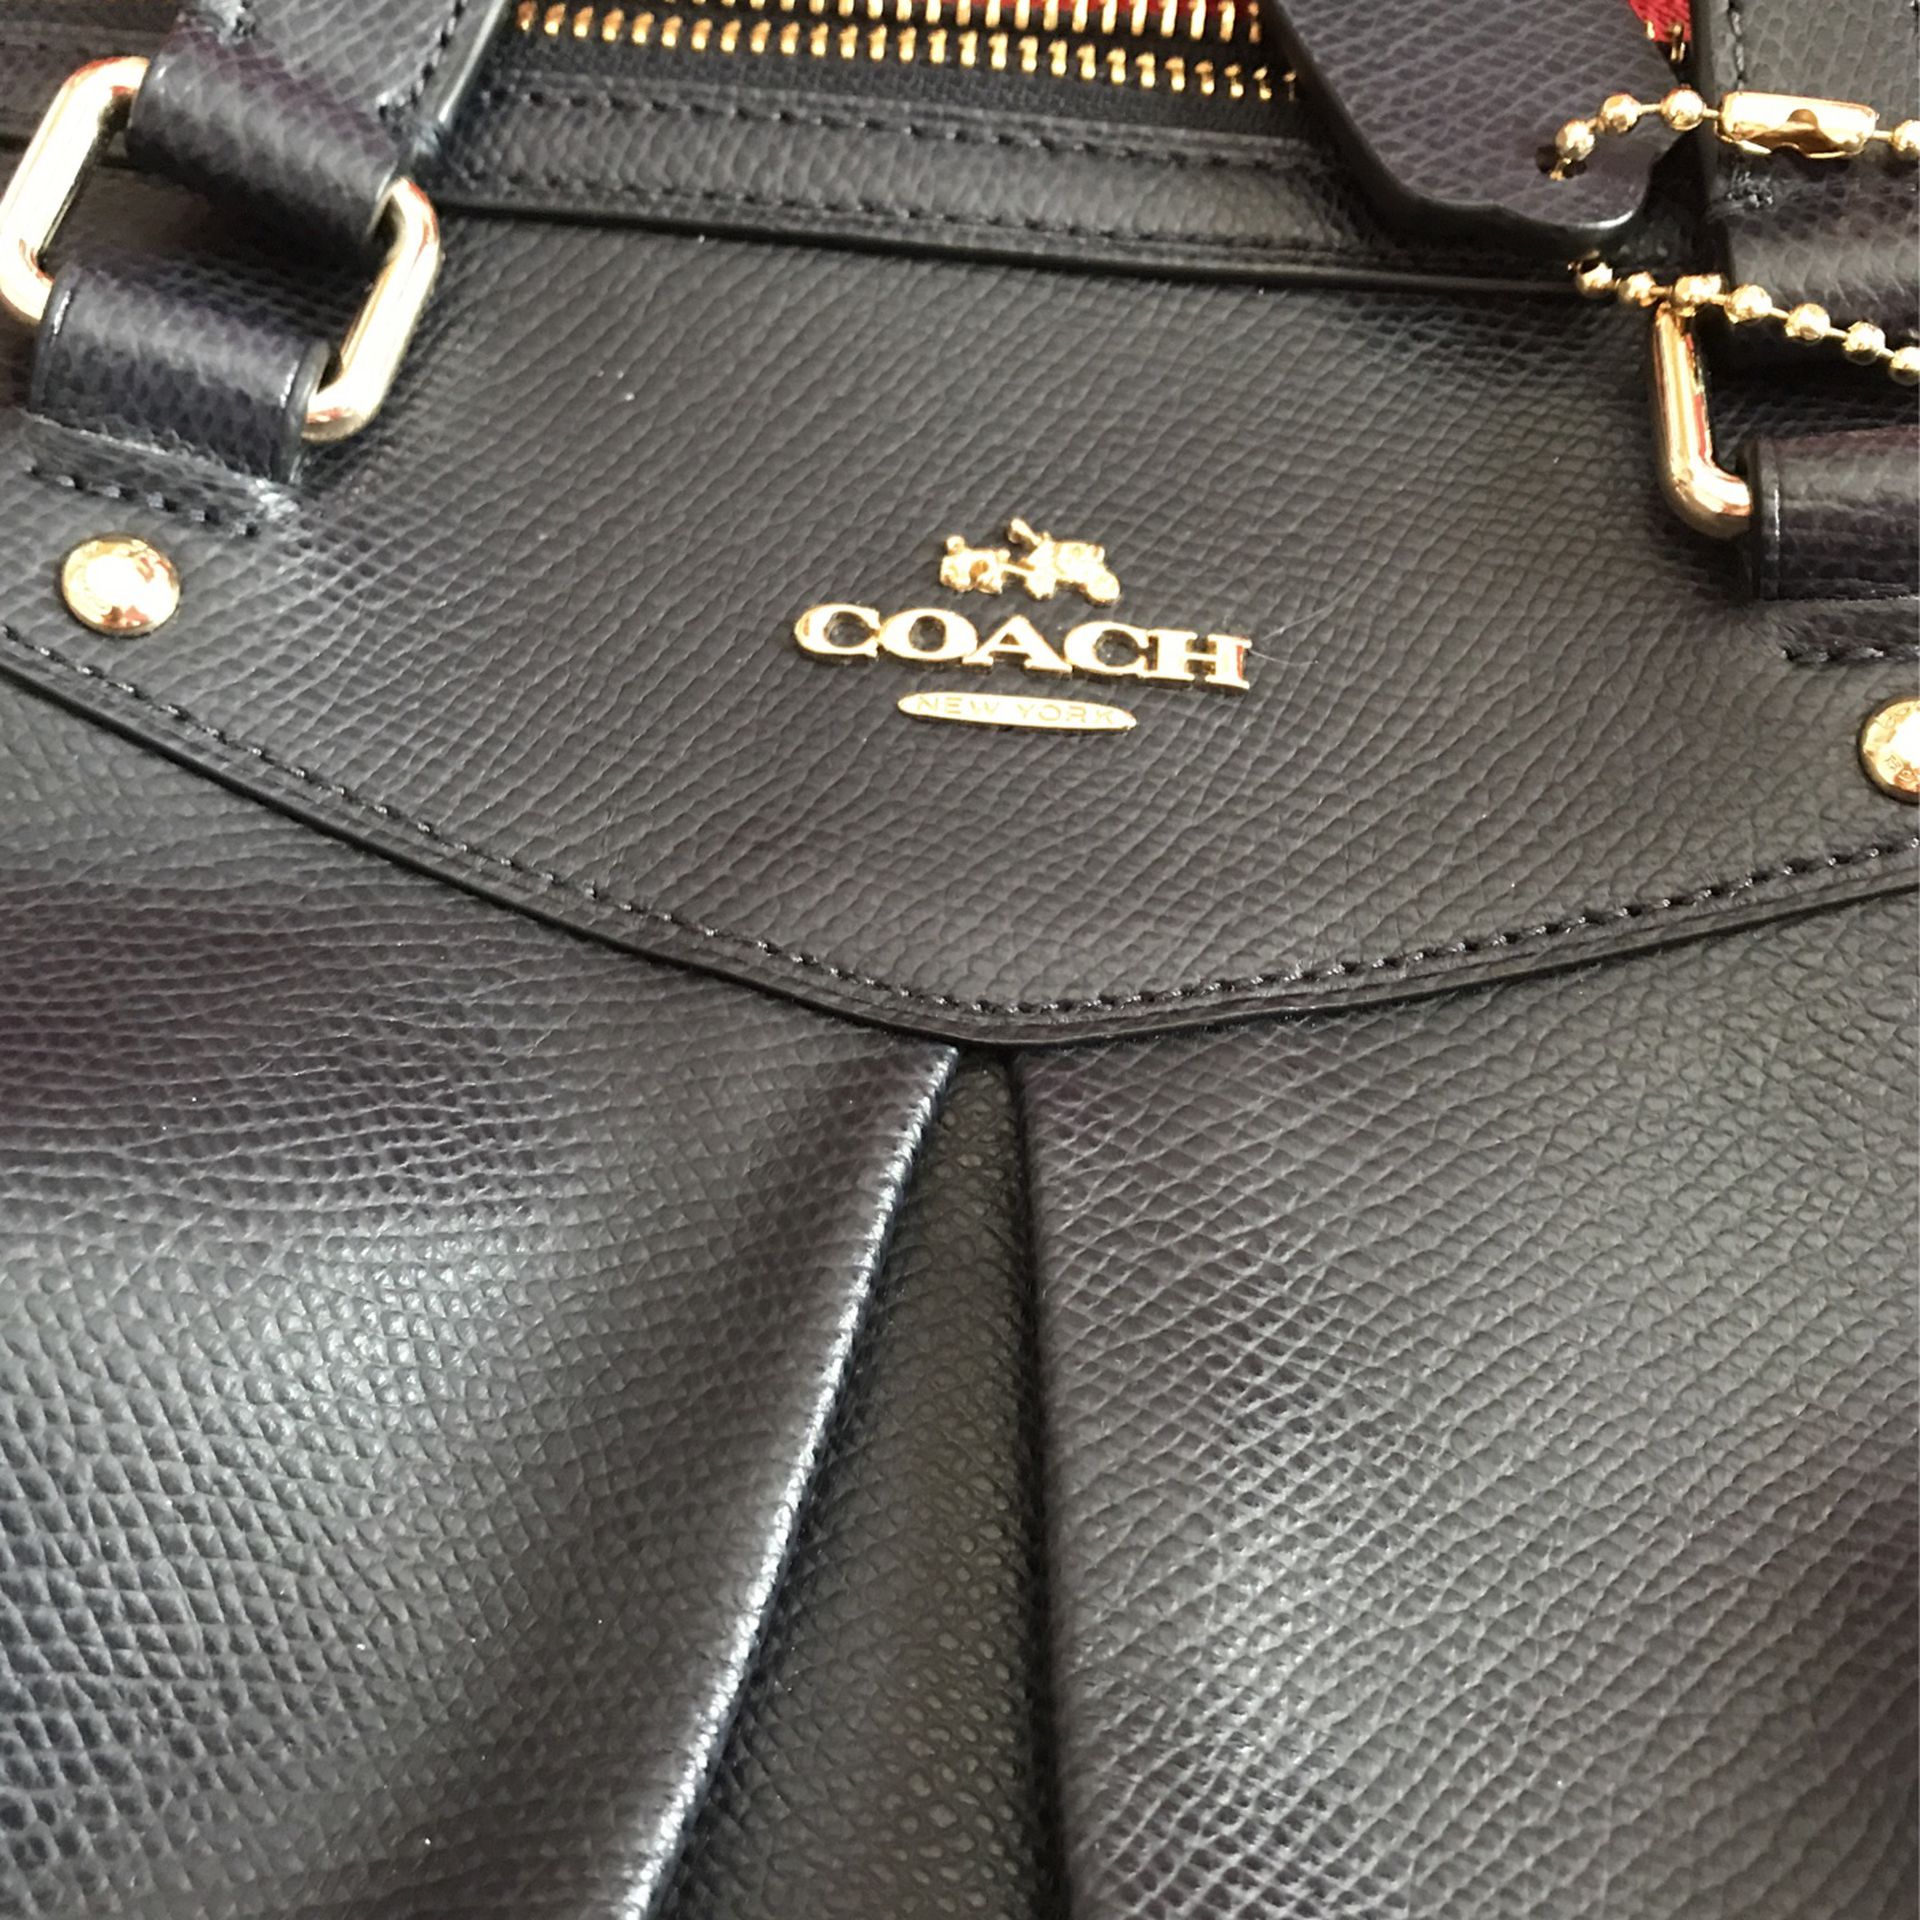 Coach Bag Leather Gray